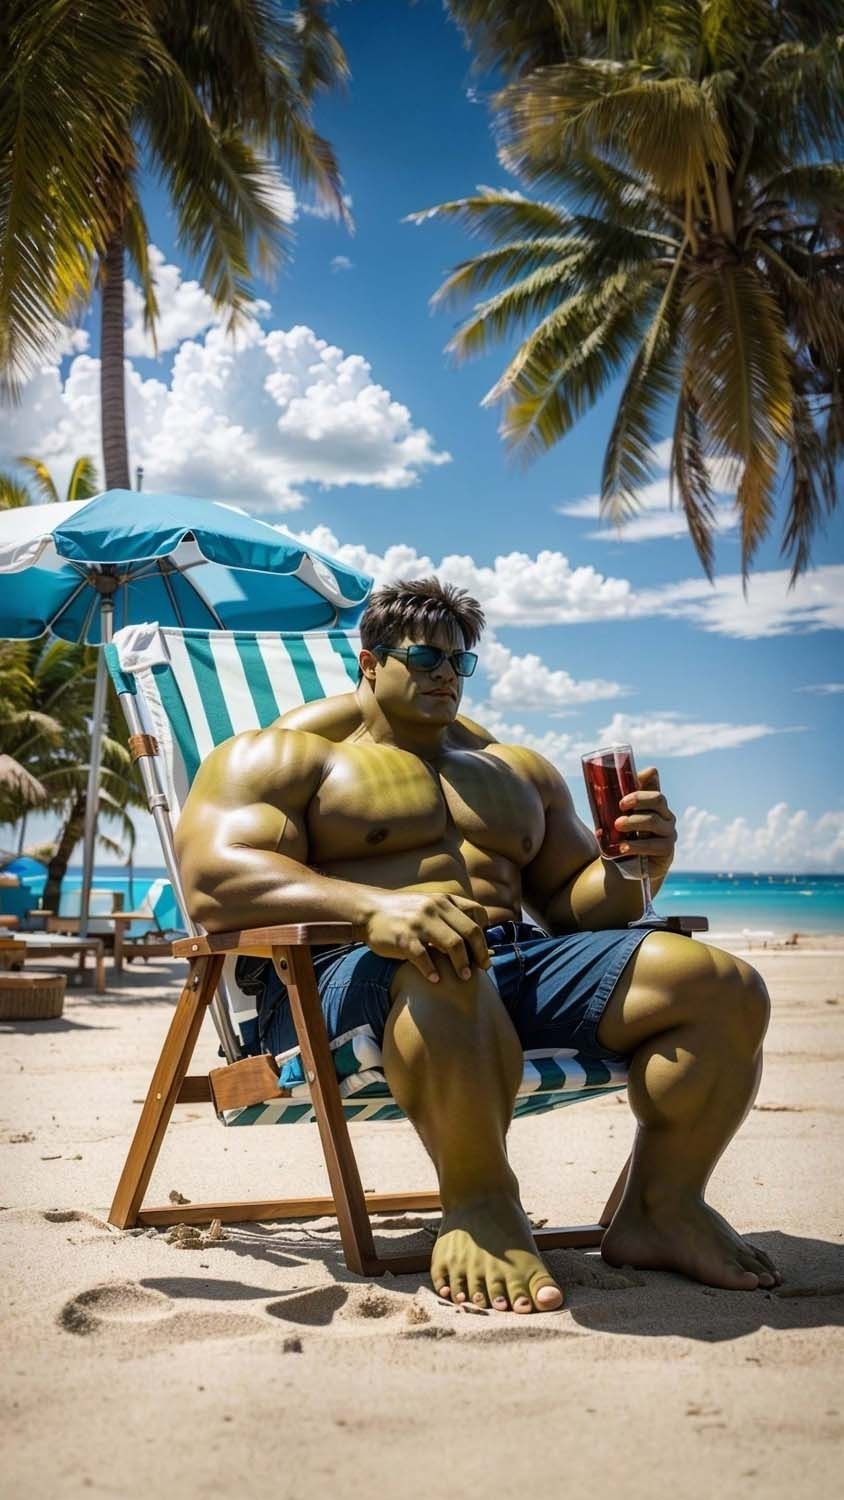 Hulk on Vacation iPhone Wallpaper  iPhone Wallpapers